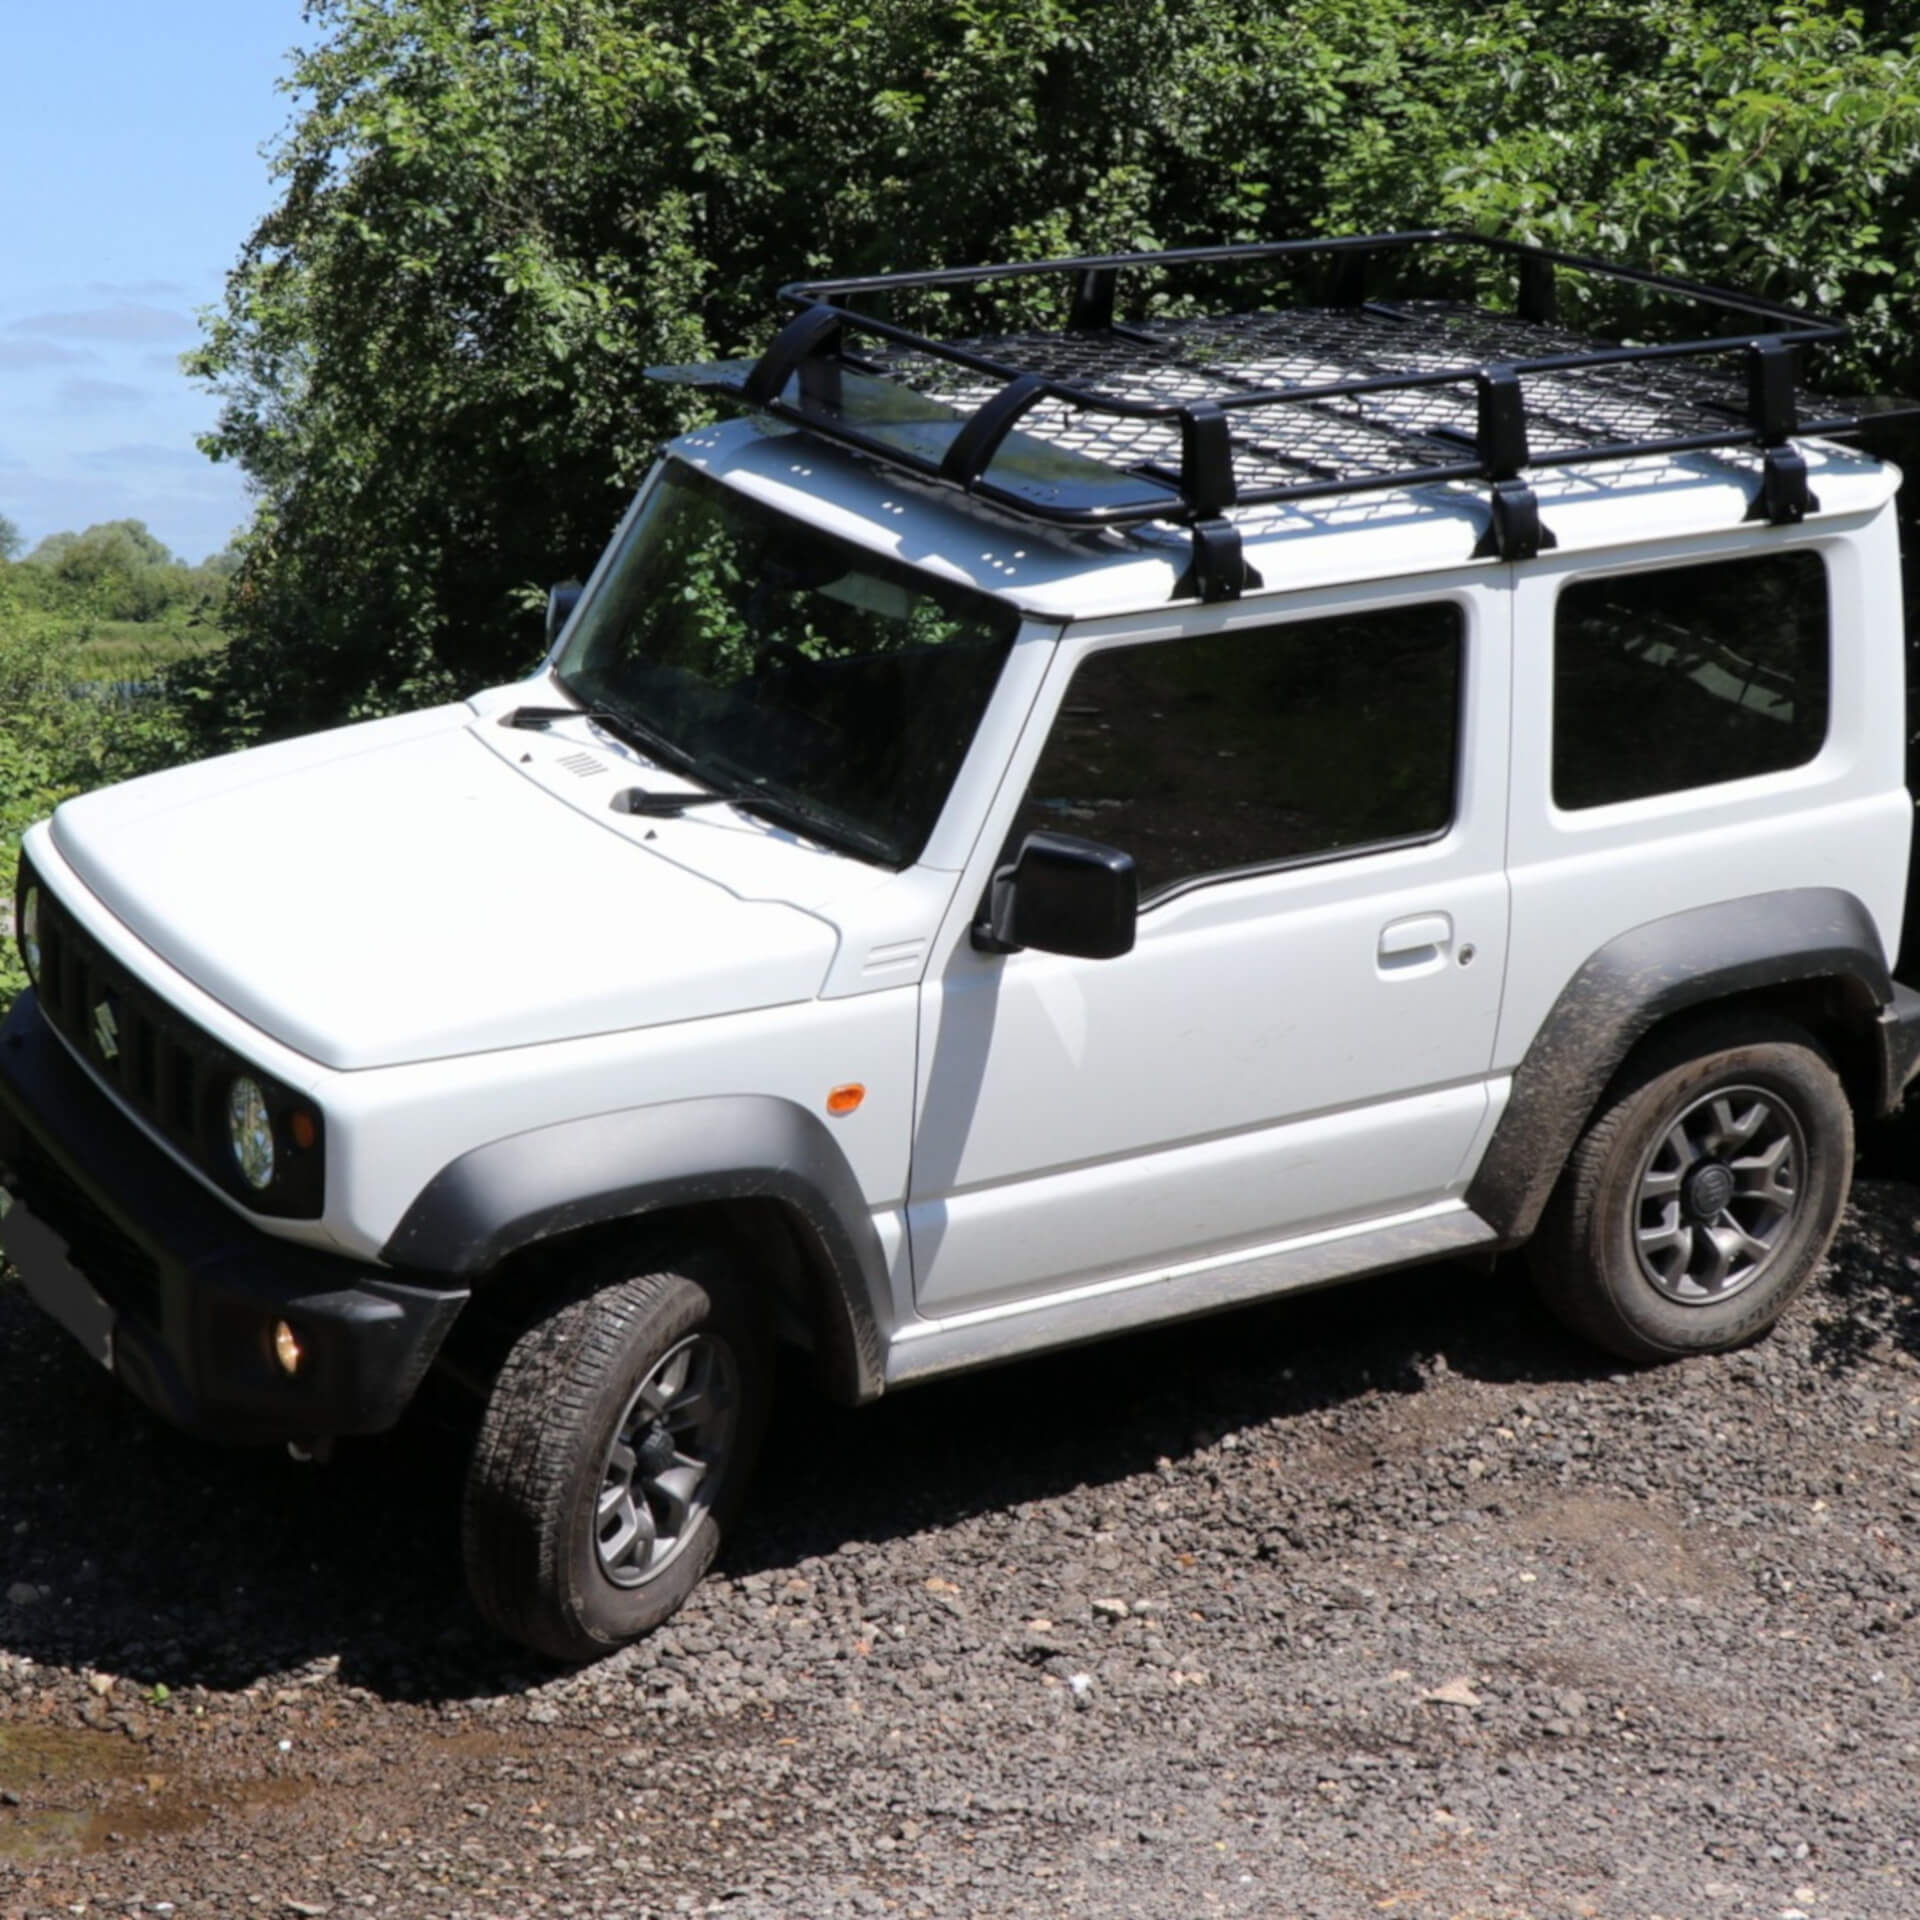 Direct4x4 accessories for Suzuki Jimny vehicles with a photo of a white Suzuki Jimny offroad fitted with a full basket roof rack